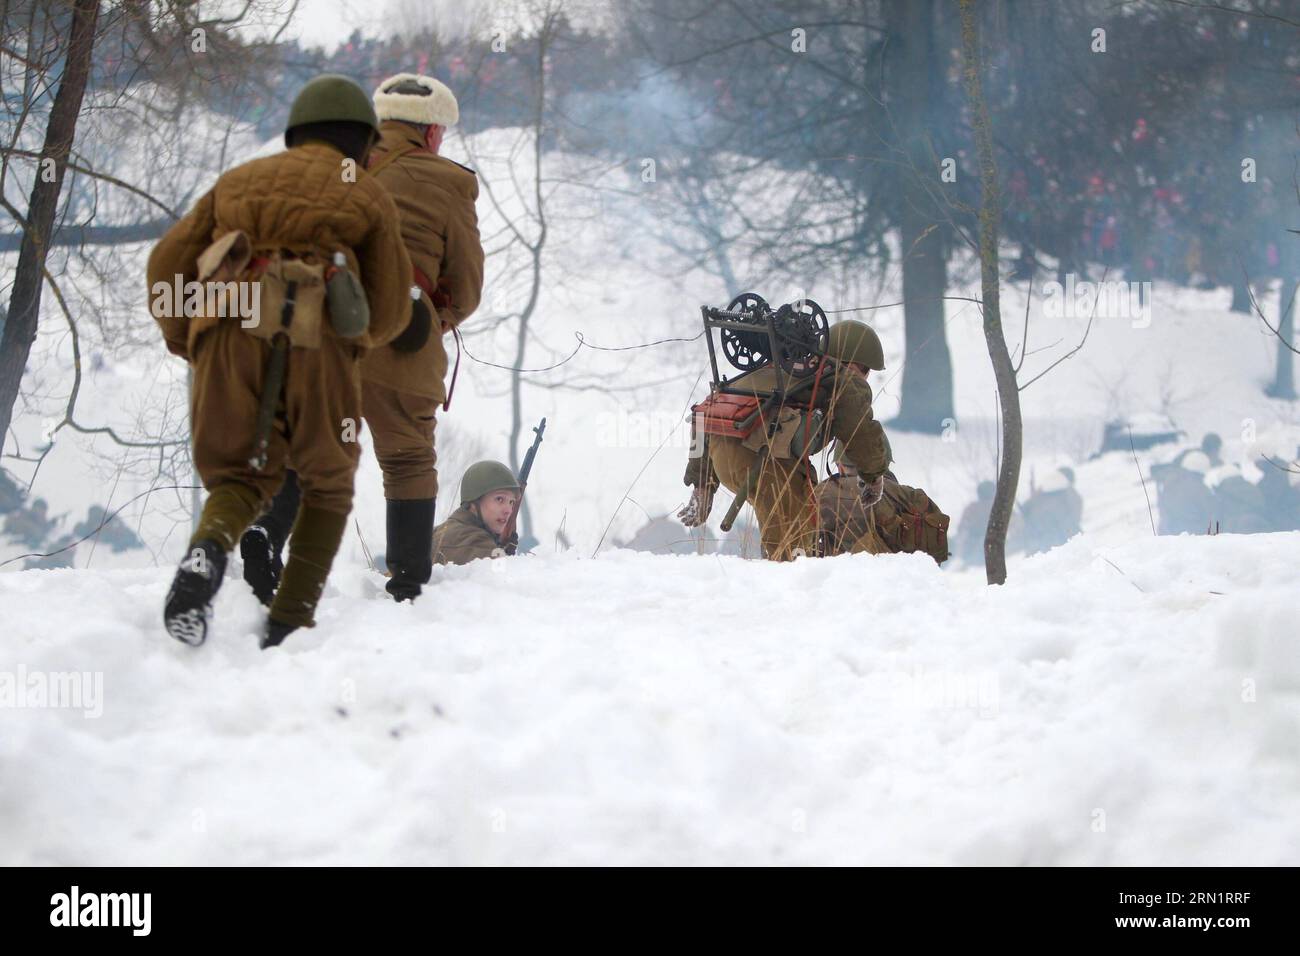 Reenactors dressed as World War II (WWII) Soviet Red Army troops take part in a battle reconstruction marking the 72nd anniversary of the breakthrough of Leningrad (St. Petersburg) from the Nazi blockade in WWII on Jan. 18, 2015, in St. Petersburg, Russia. ) (lmz) RUSSIA-ST. PETERSBURG-WWII-REENACTMENT LuxJinbo PUBLICATIONxNOTxINxCHN   Reenactors Dressed As World was II WWII Soviet Red Army Troops Take Part in a Battle Reconstruction marking The 72nd Anniversary of The BREAKTHROUGH of Leningrad St Petersburg from The Nazi Blockade in WWII ON Jan 18 2015 in St Petersburg Russia  Russia St Peter Stock Photo